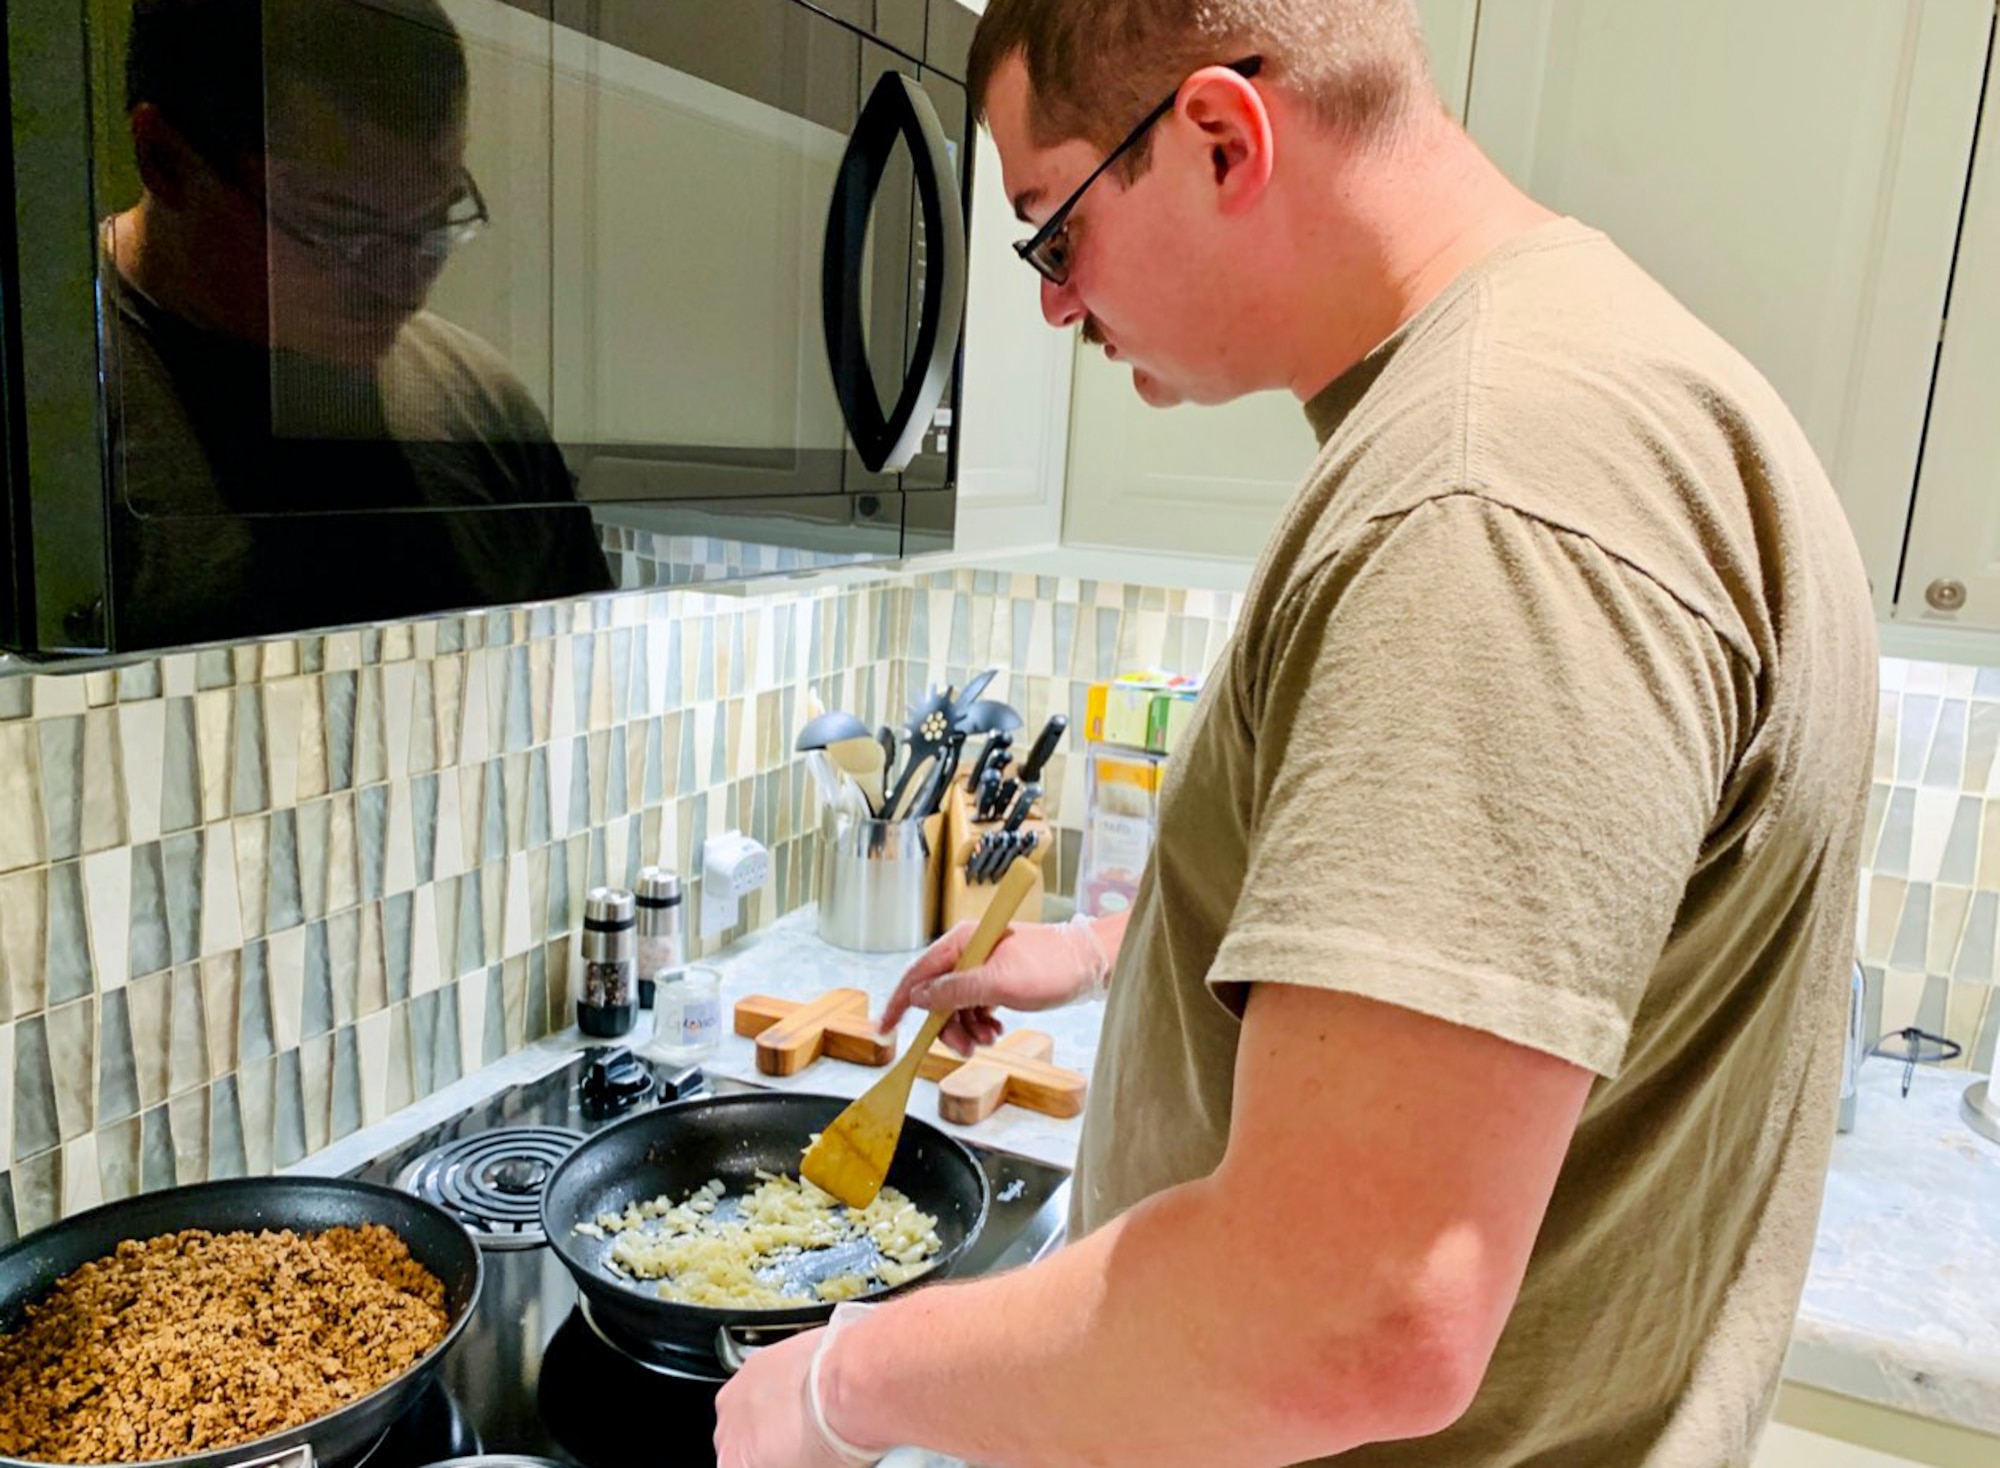 Tech. Sgt. Dustin Krasovic, Geospatial Intelligence Analysis Squadron member, cooks food at the Veterans Administration Medical Center Fisher House in Dayton, Ohio on Feb. 20, 2020. During the volunteer event, six members of the Geospatial Intelligence Analysis Squadron bought, prepared and cooked meals for veterans located at the medical center. (U.S. Air Force photo/Courtesy)